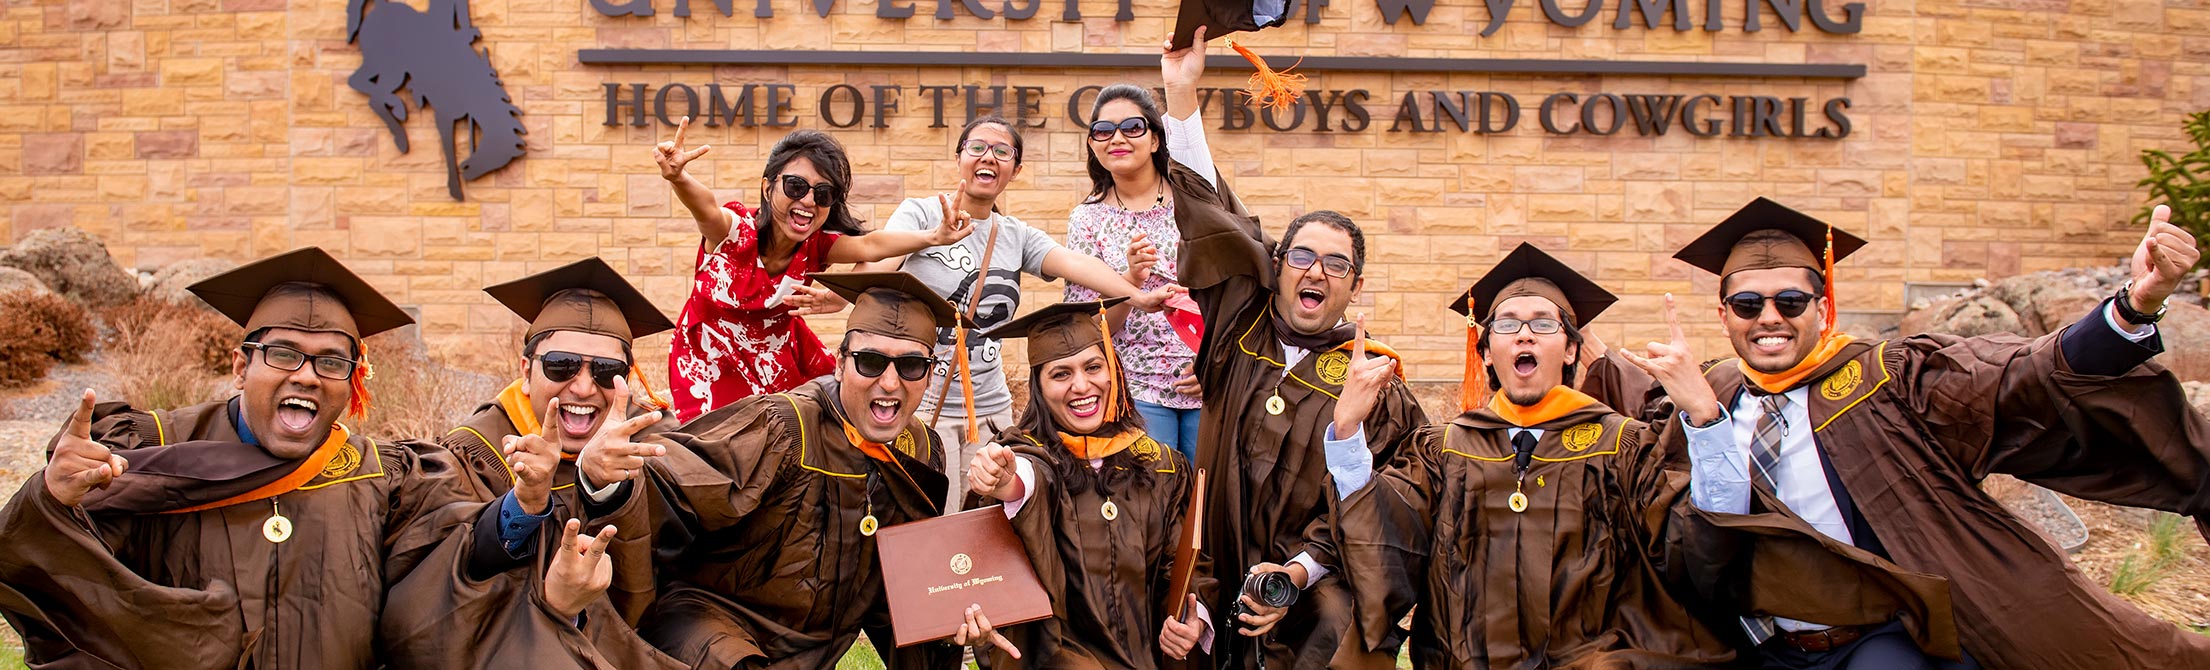 Several students pose in front of the main sign for the University of Wyoming, "Home of the Cowboys and Cowgirls."